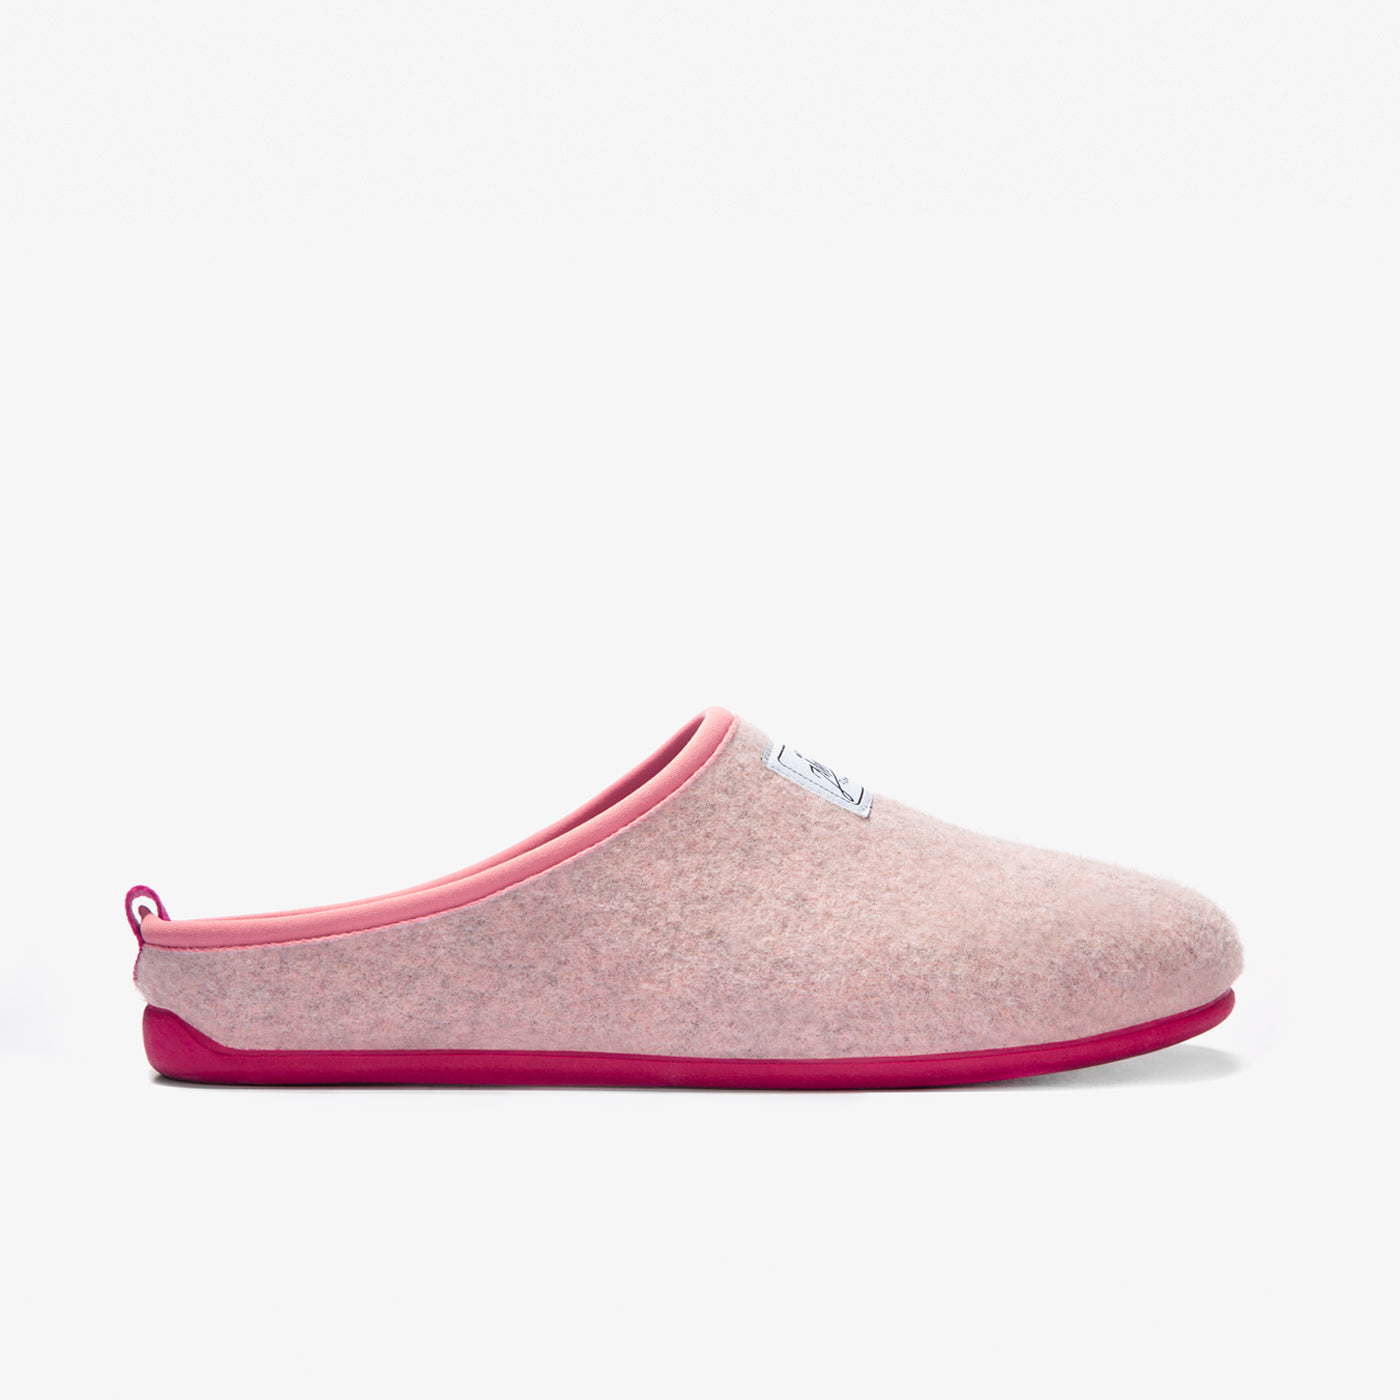 Mercredy Slippers - Ladies - Pink with Fuchsia Sole